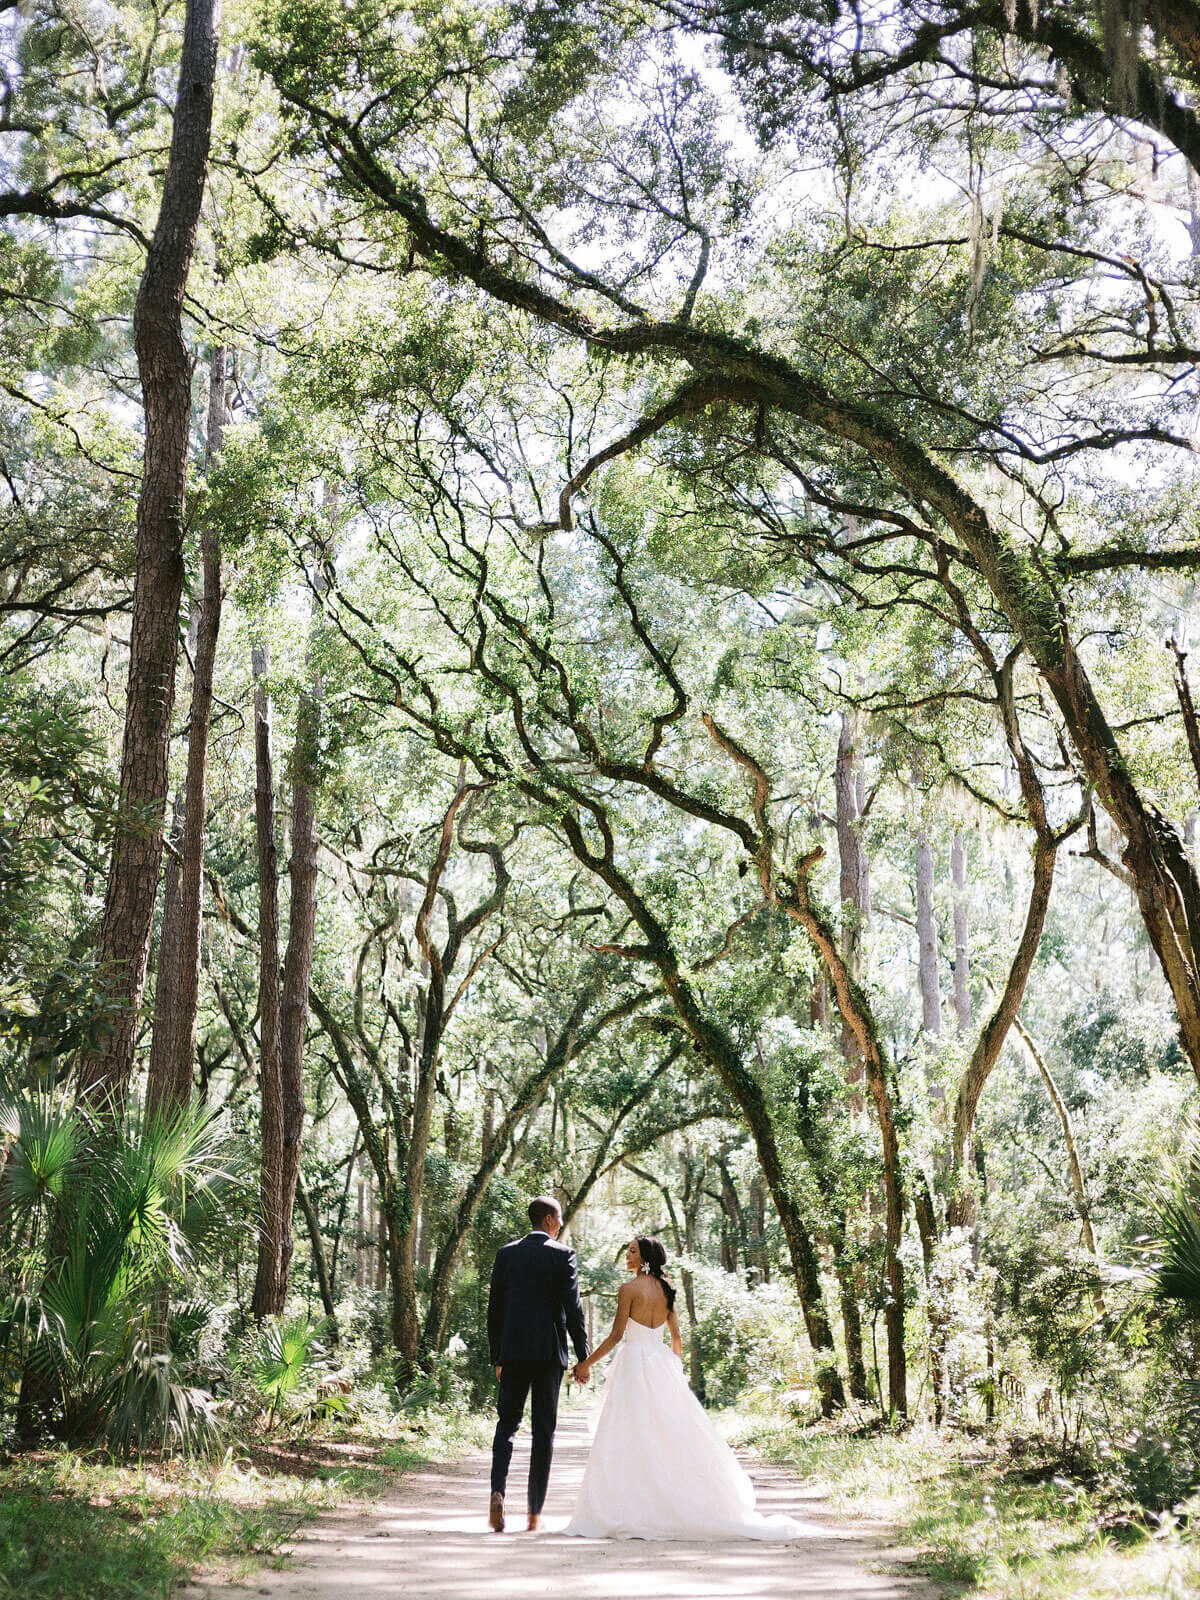 The bride and groom are walking hand in hand amongst the trees in Montage at Palmetto Bluff. Destination wedding image by Jenny Fu Studio